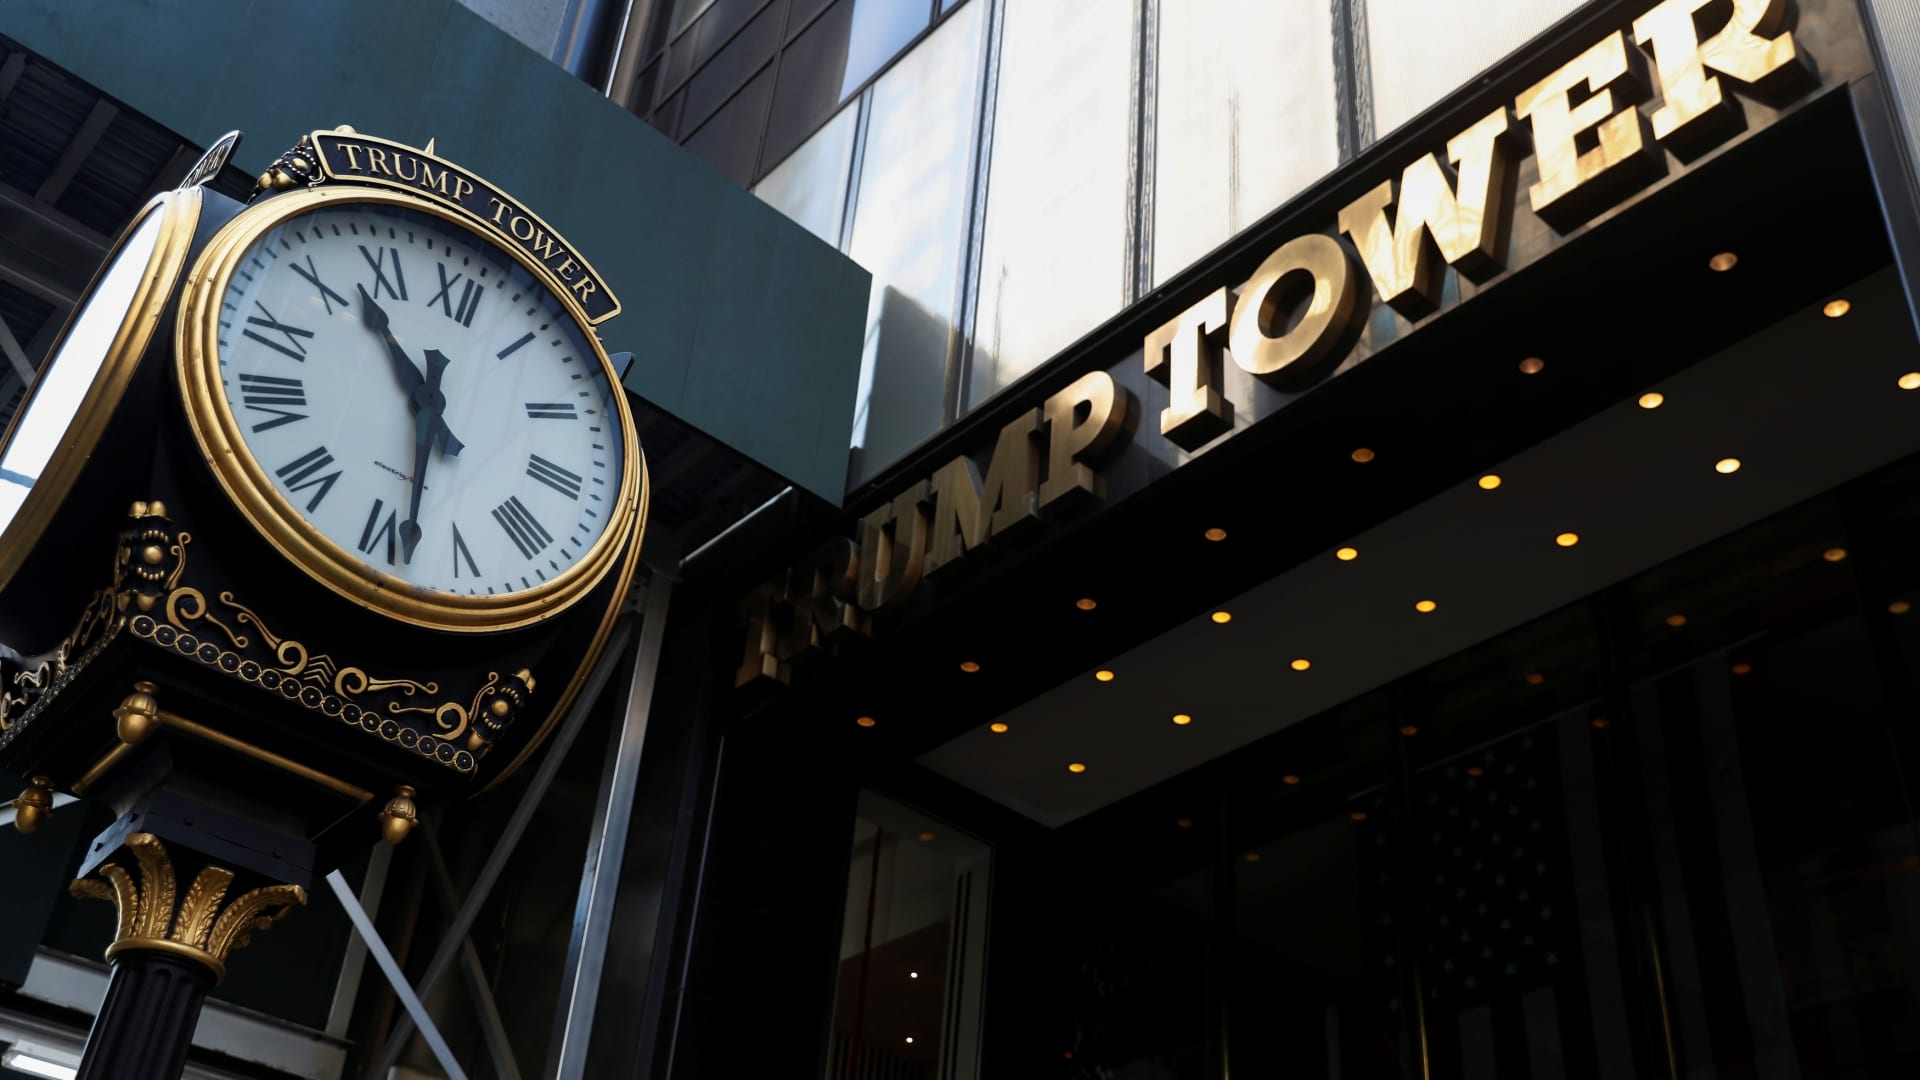 Judge approves independent monitor to oversee Trump Organization financial reporting in win for New York AG